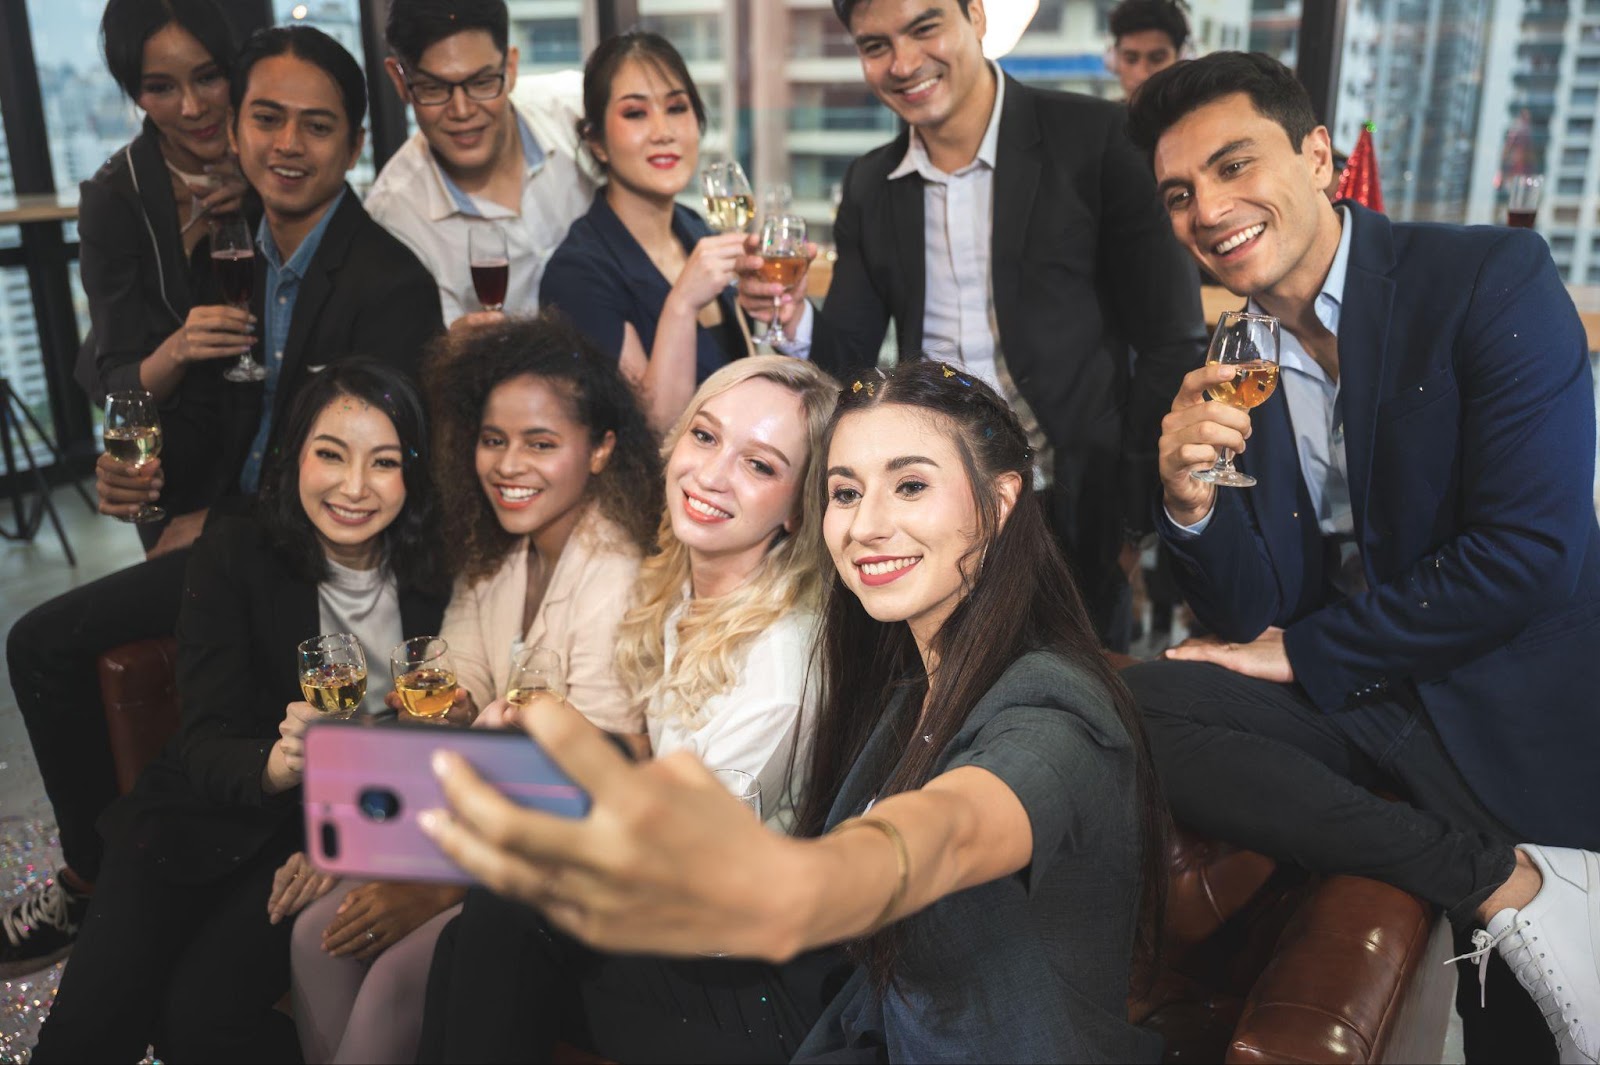 A diverse group of individuals smiling and taking a selfie with their cell phones